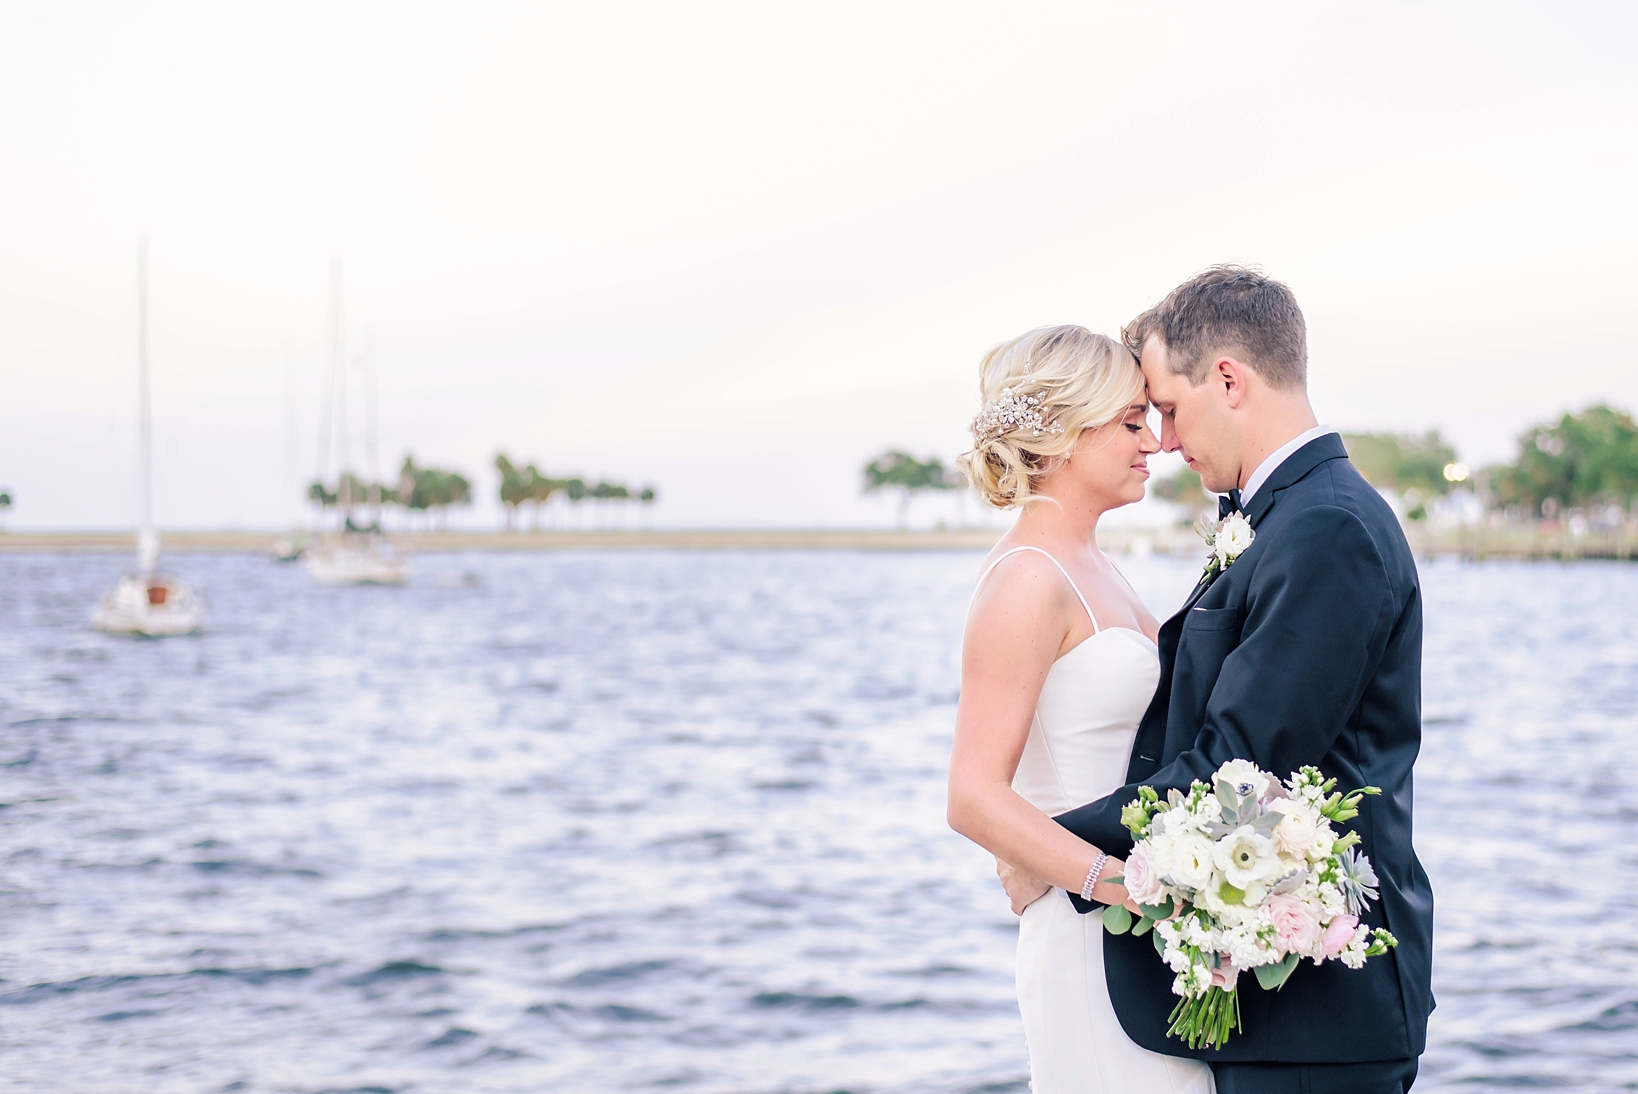 Bride and groom against a watery background in St. Petersburg, FL